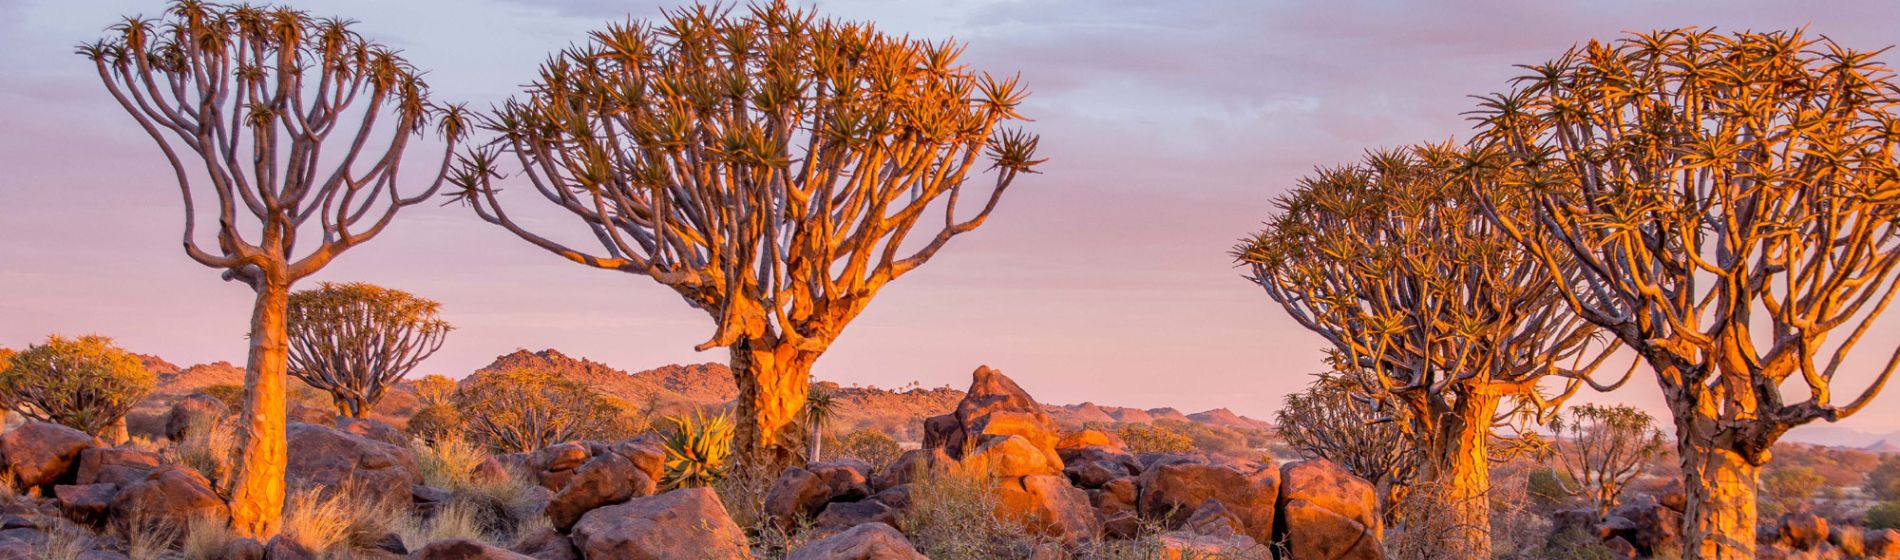 afrika_quiver_trees_1_aaron_clare_1.jpg